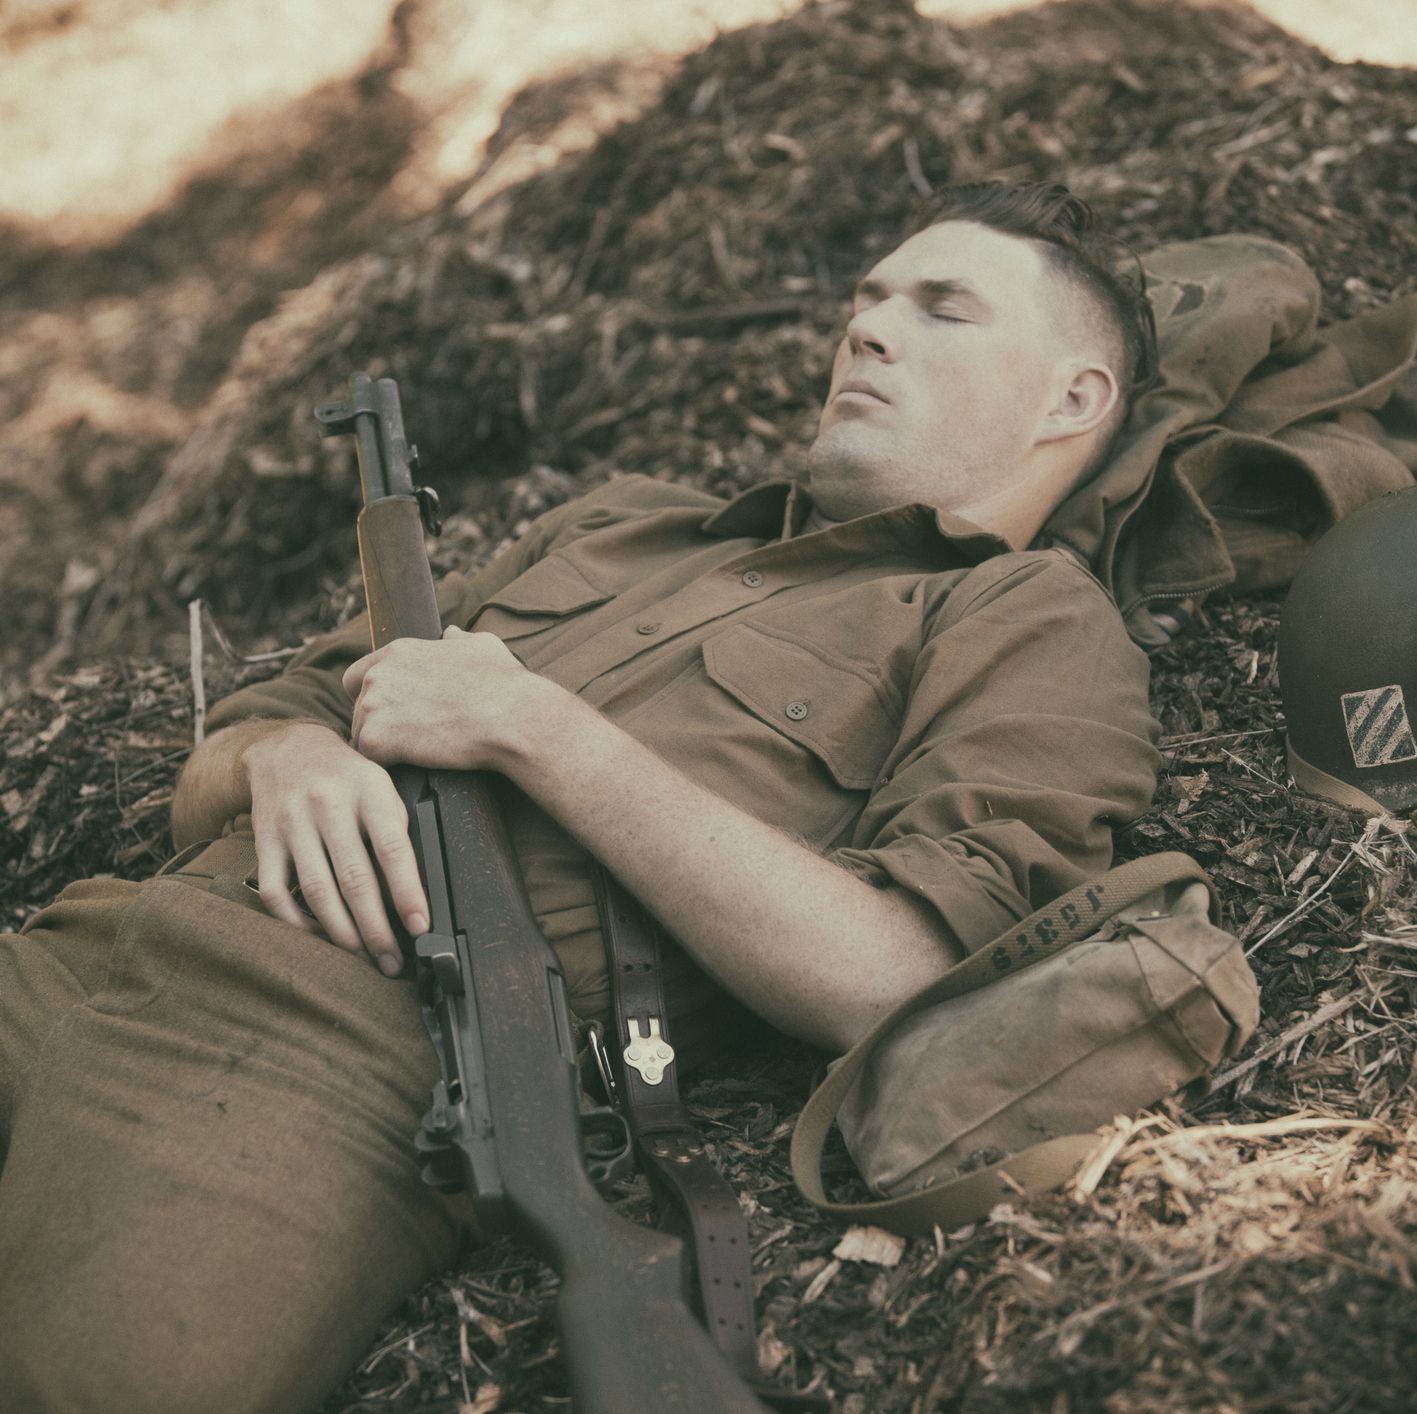 What You Need to Know About the Military Sleep Technique